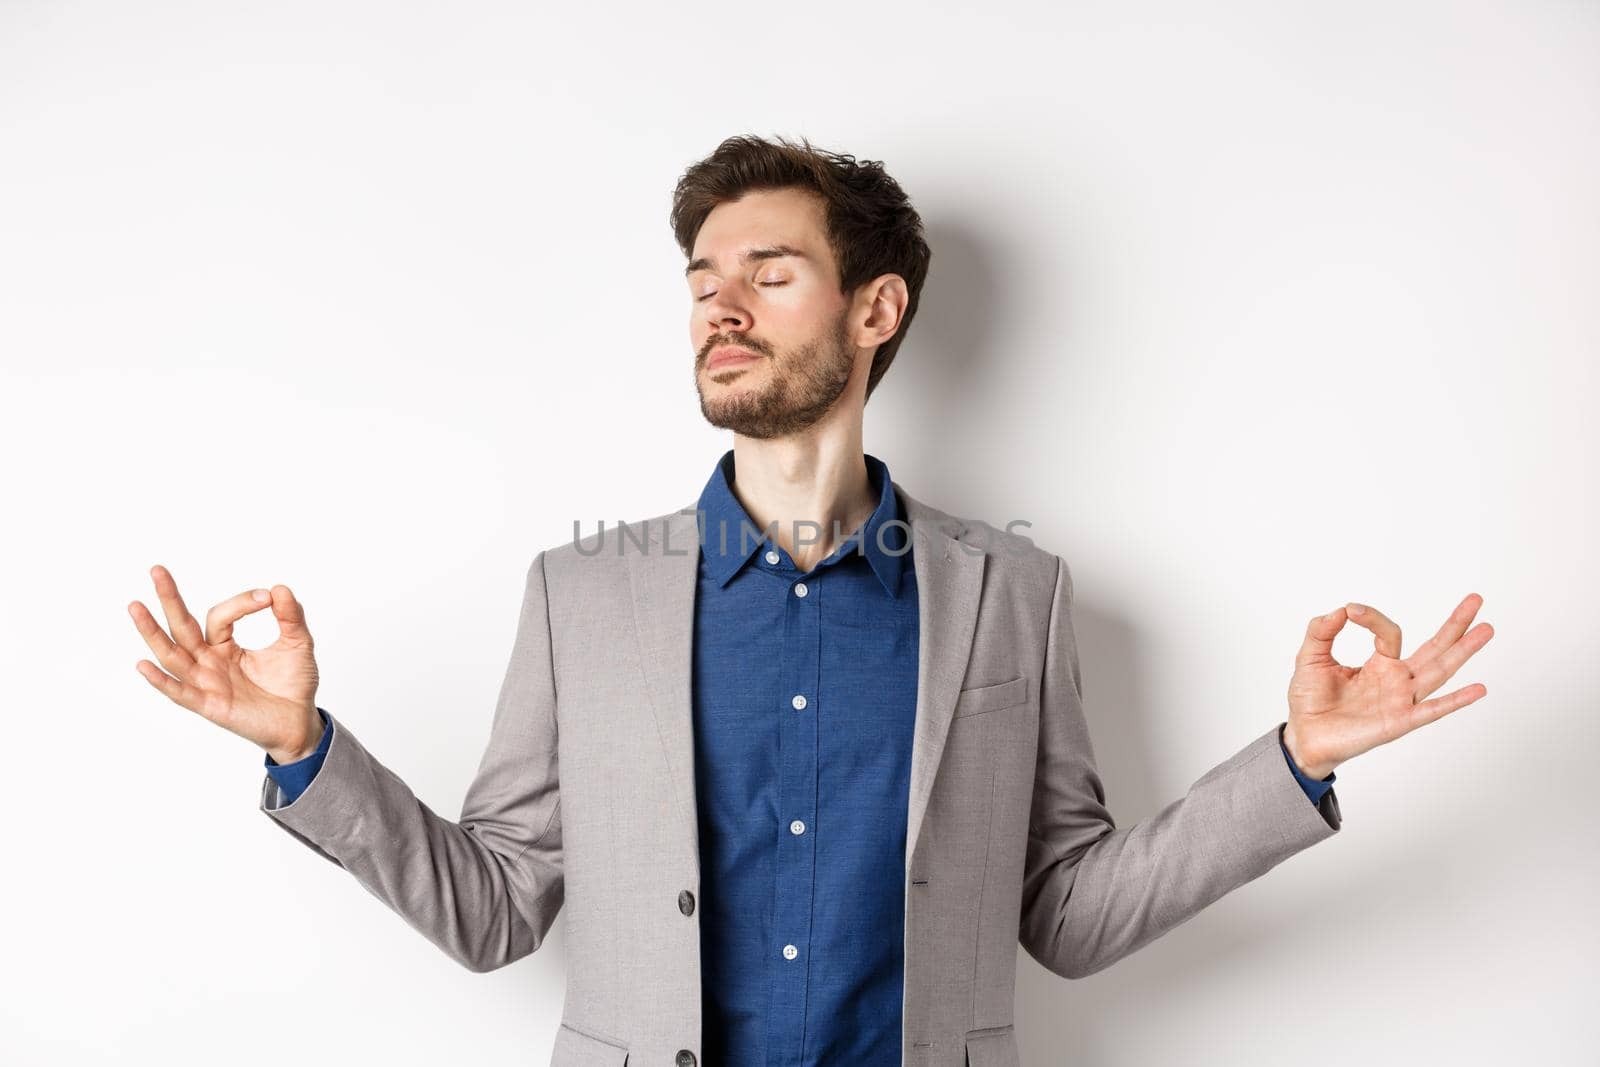 Calm and focused businessman meditating with eyes closed and hands spread sideways, finding peace in meditation, practice yoga breathing, standing on white background.